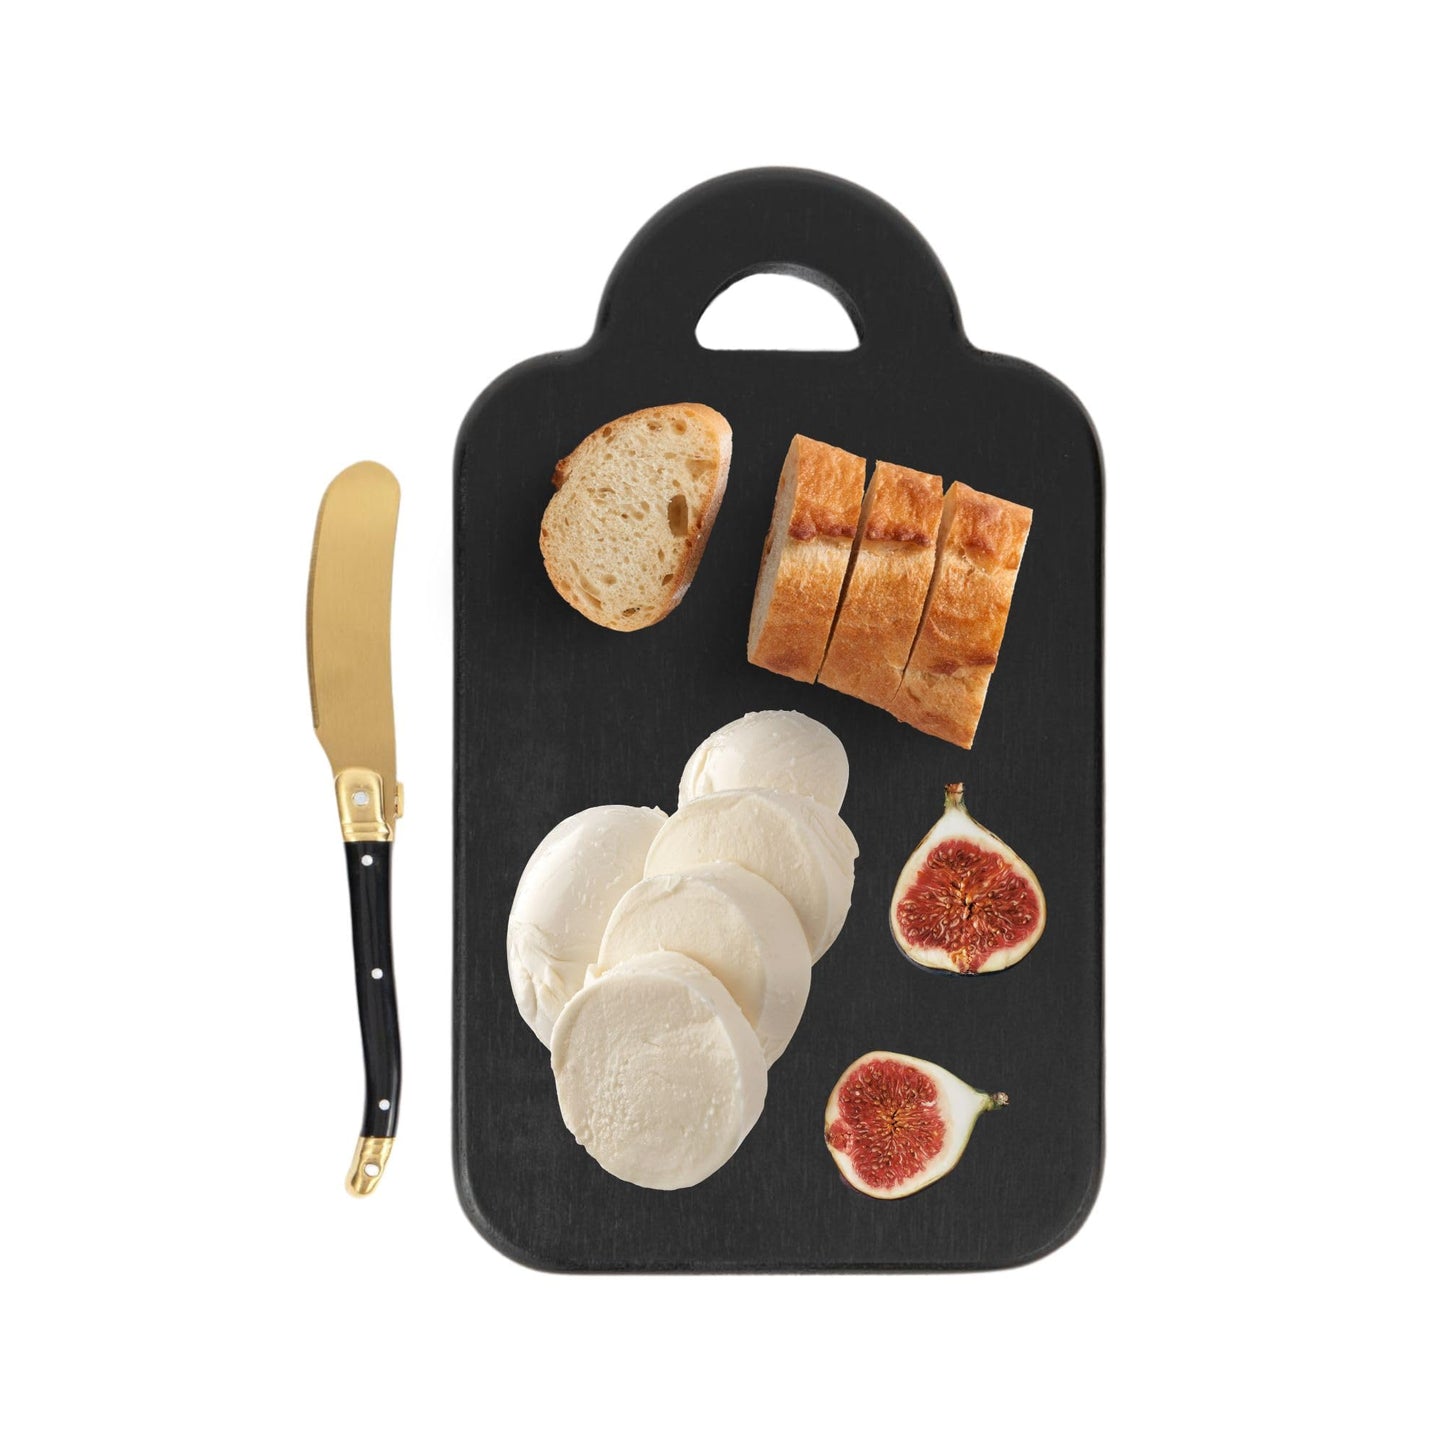 The Mini Cheese Board With Knife